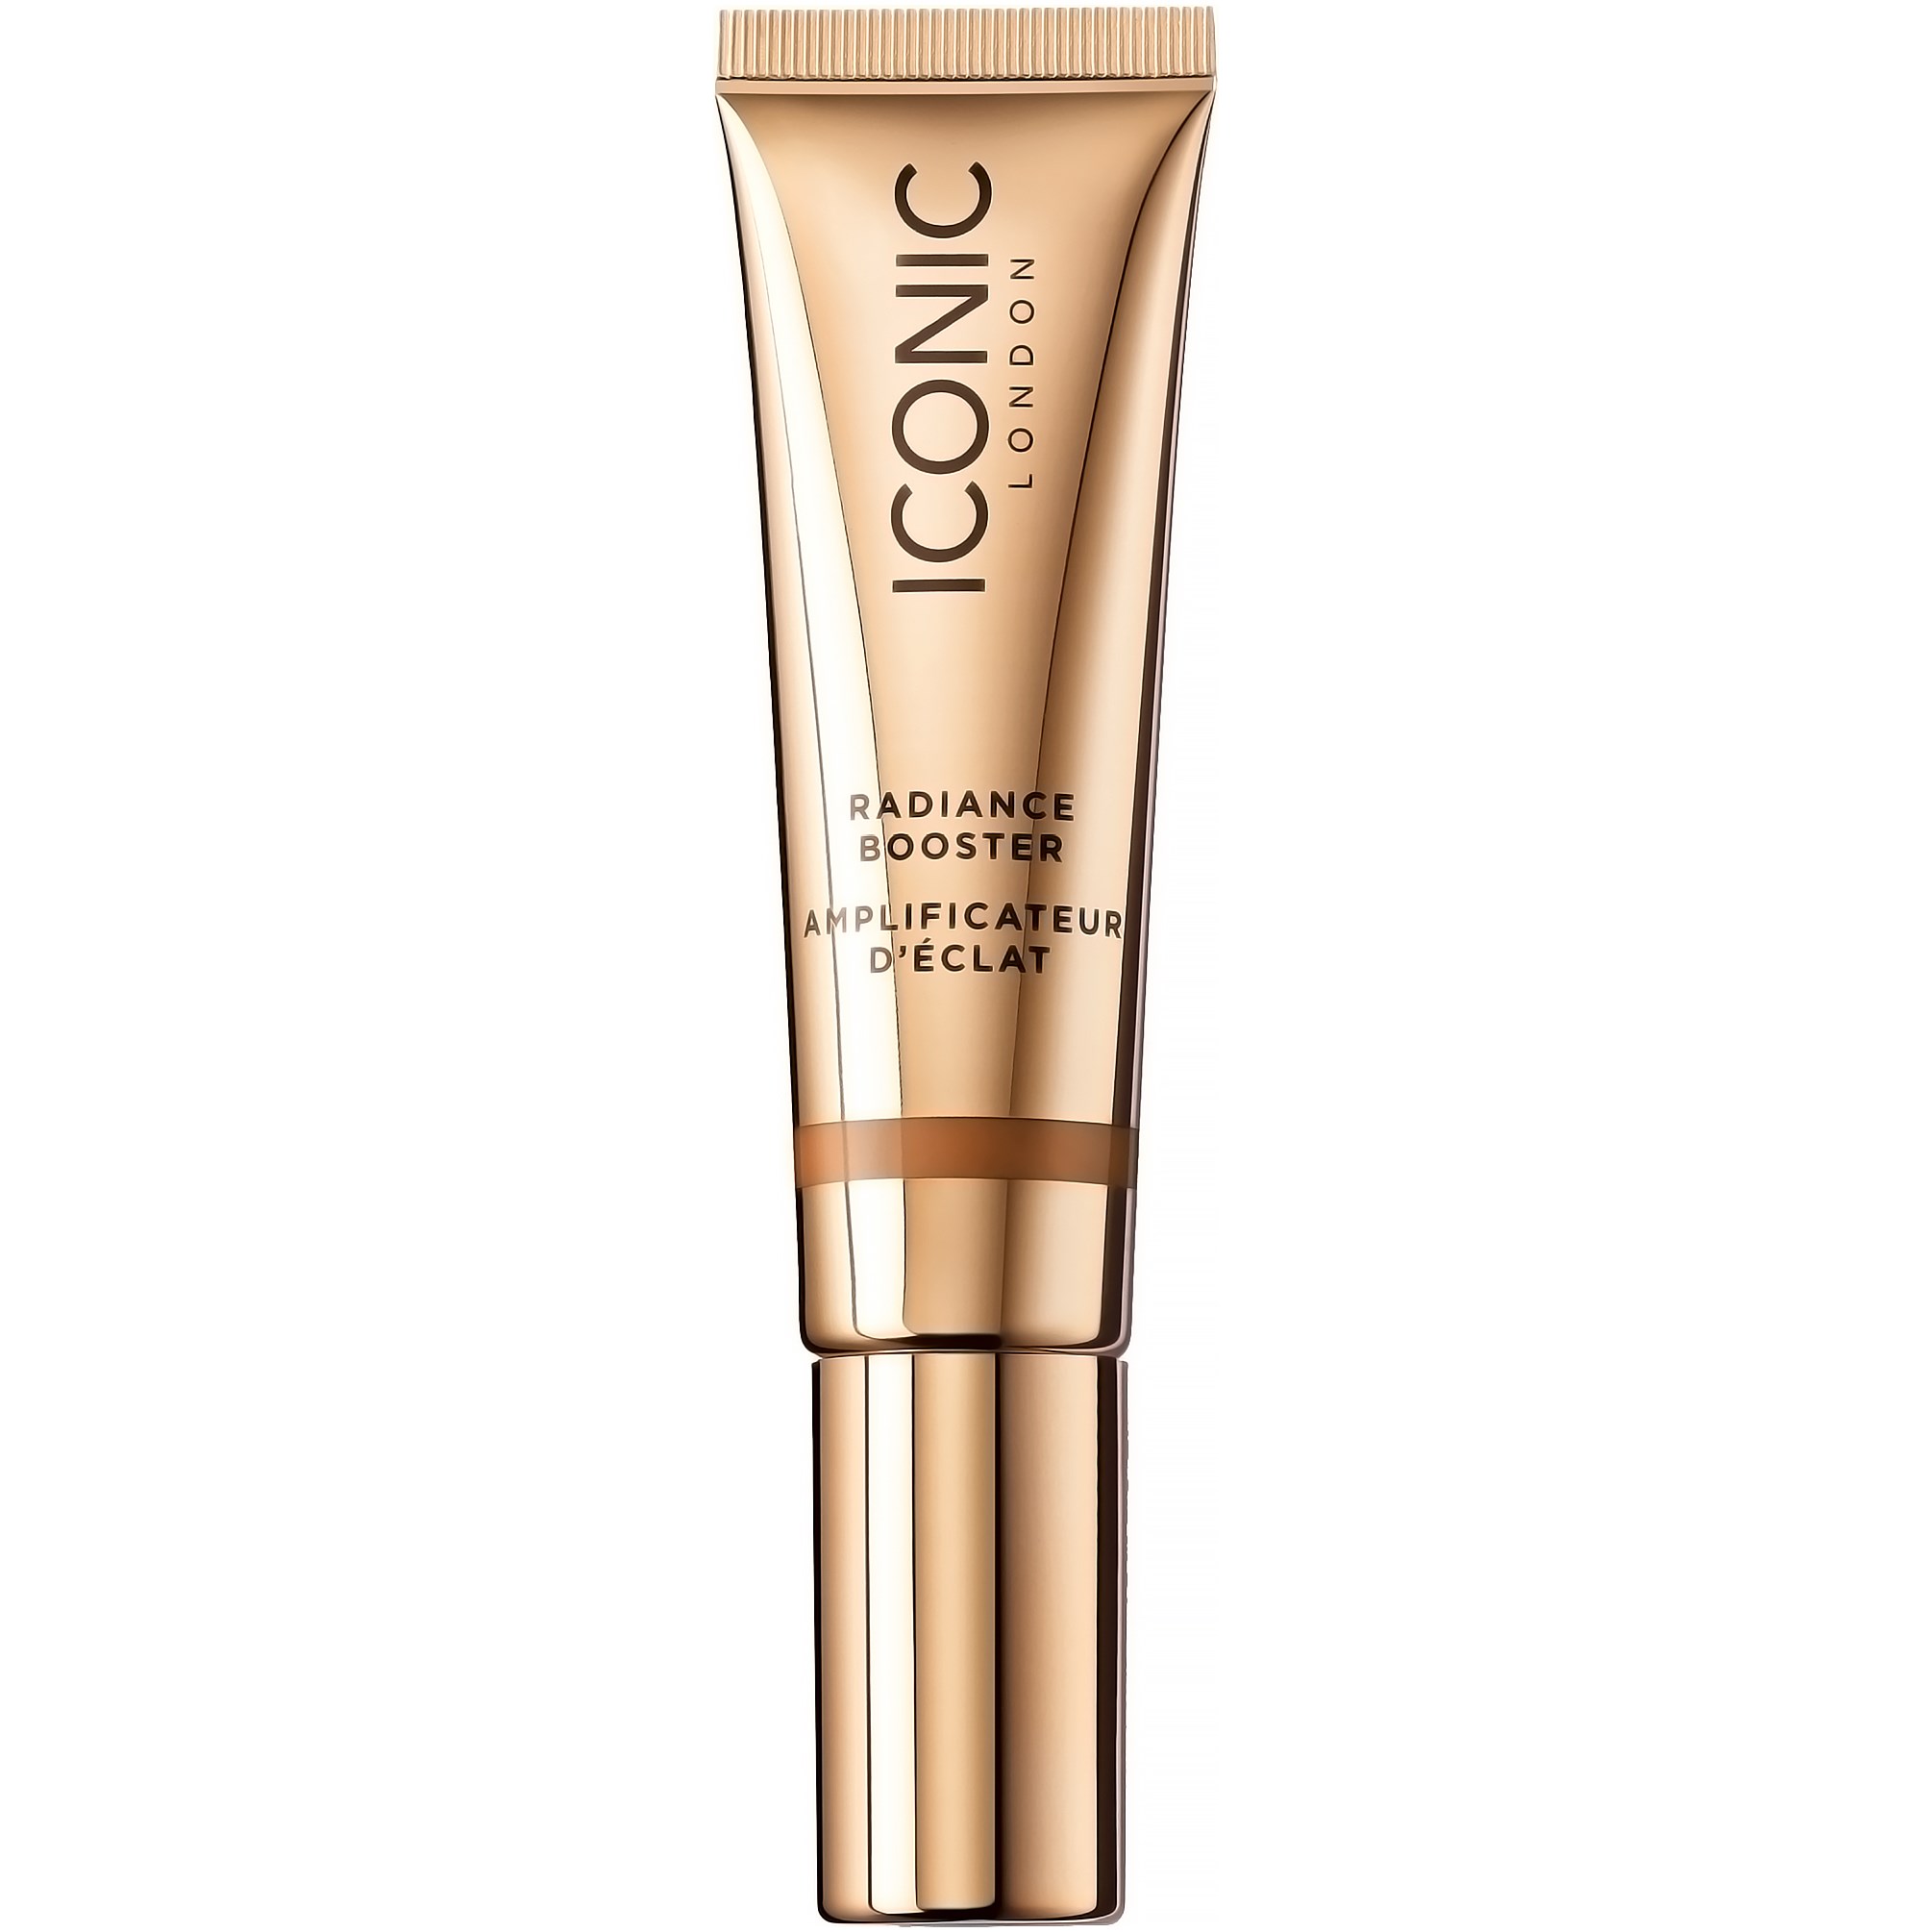 Läs mer om ICONIC London Radiance Booster Toffee Glow